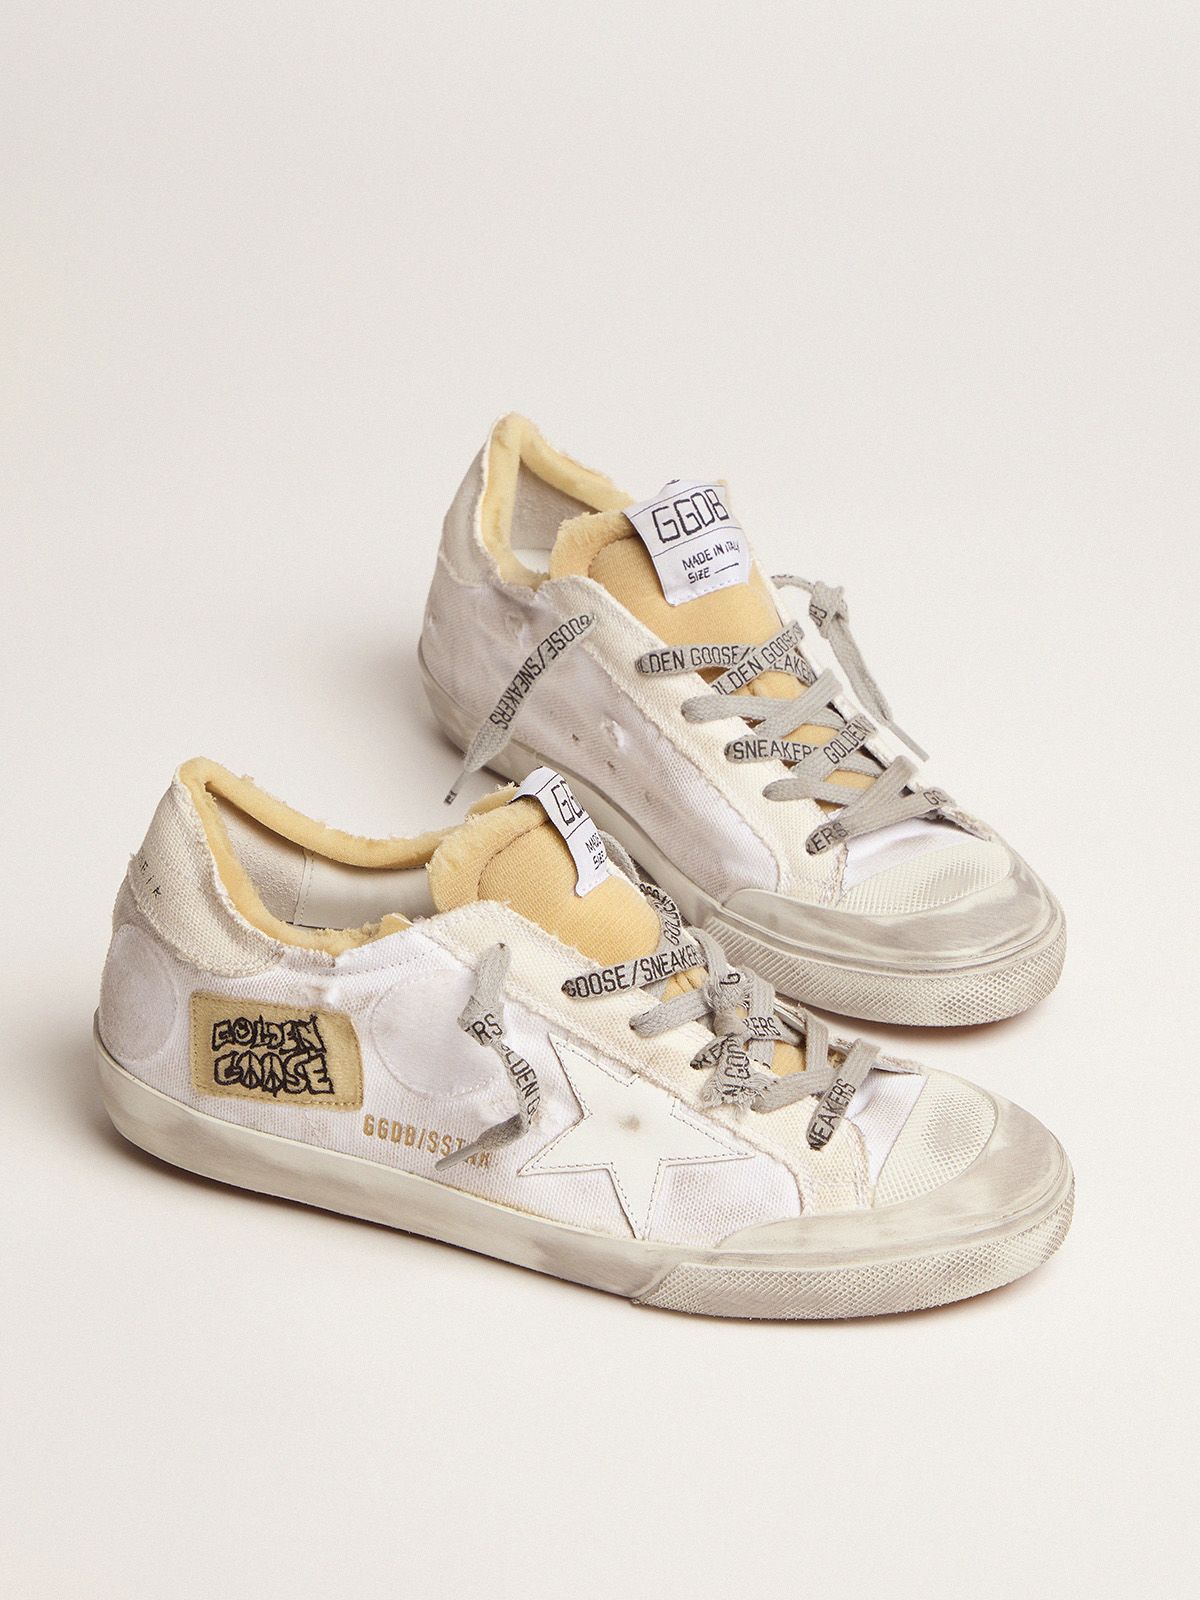 Dream Maker Collection women’s canvas Super-Star sneakers with side patch